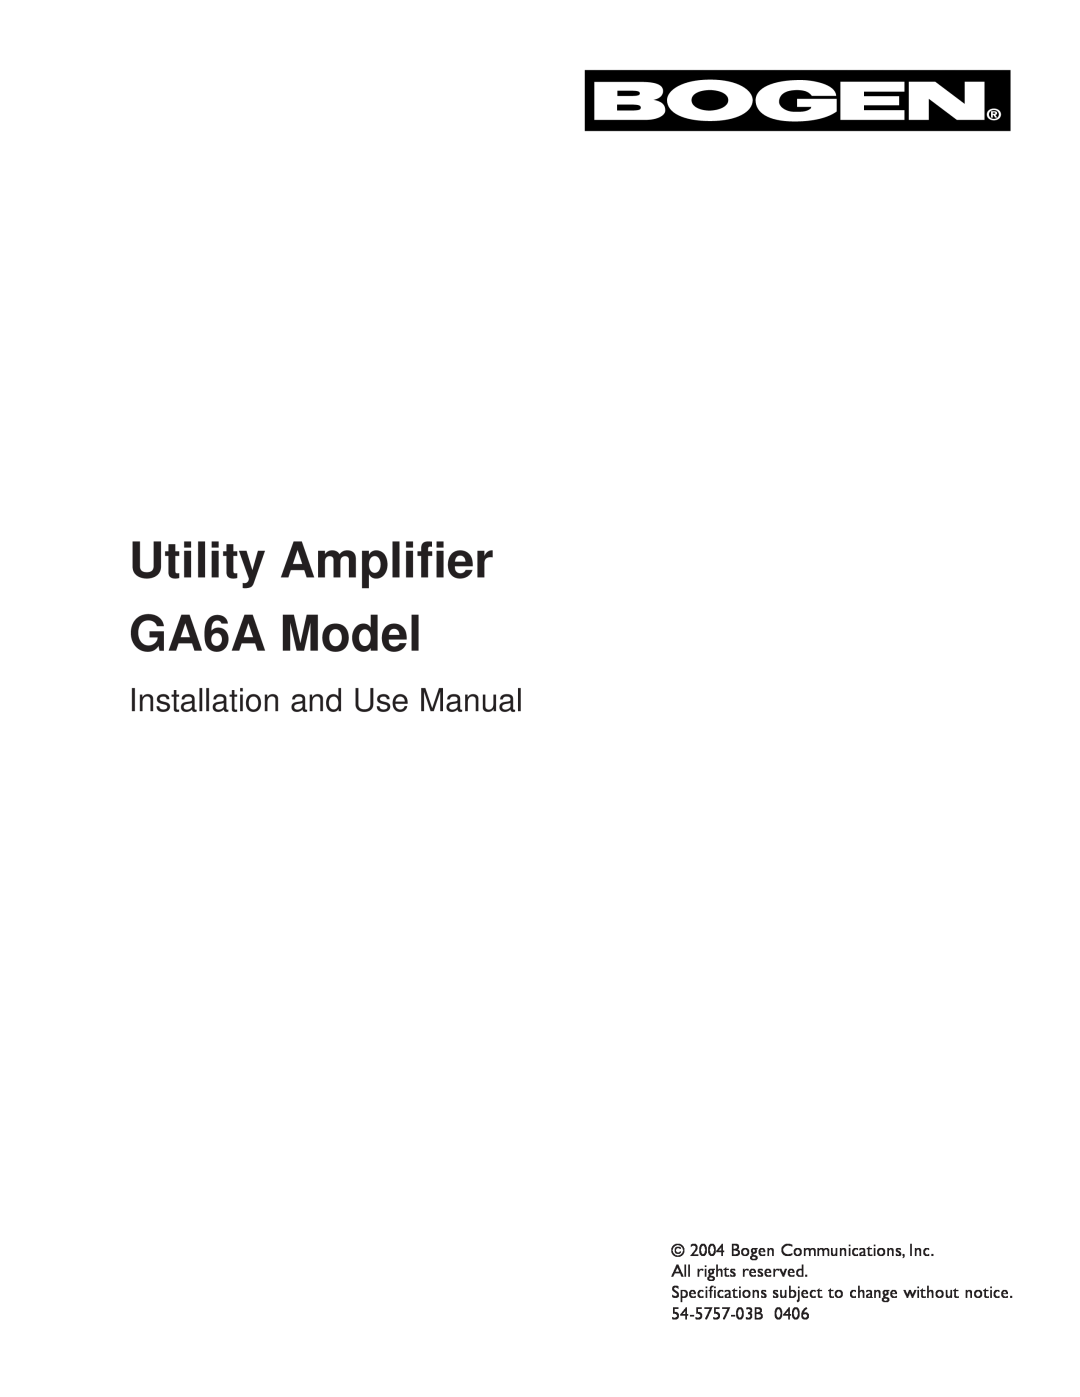 Bogen specifications Utility Amplifier GA6A Model, Installation and Use Manual 